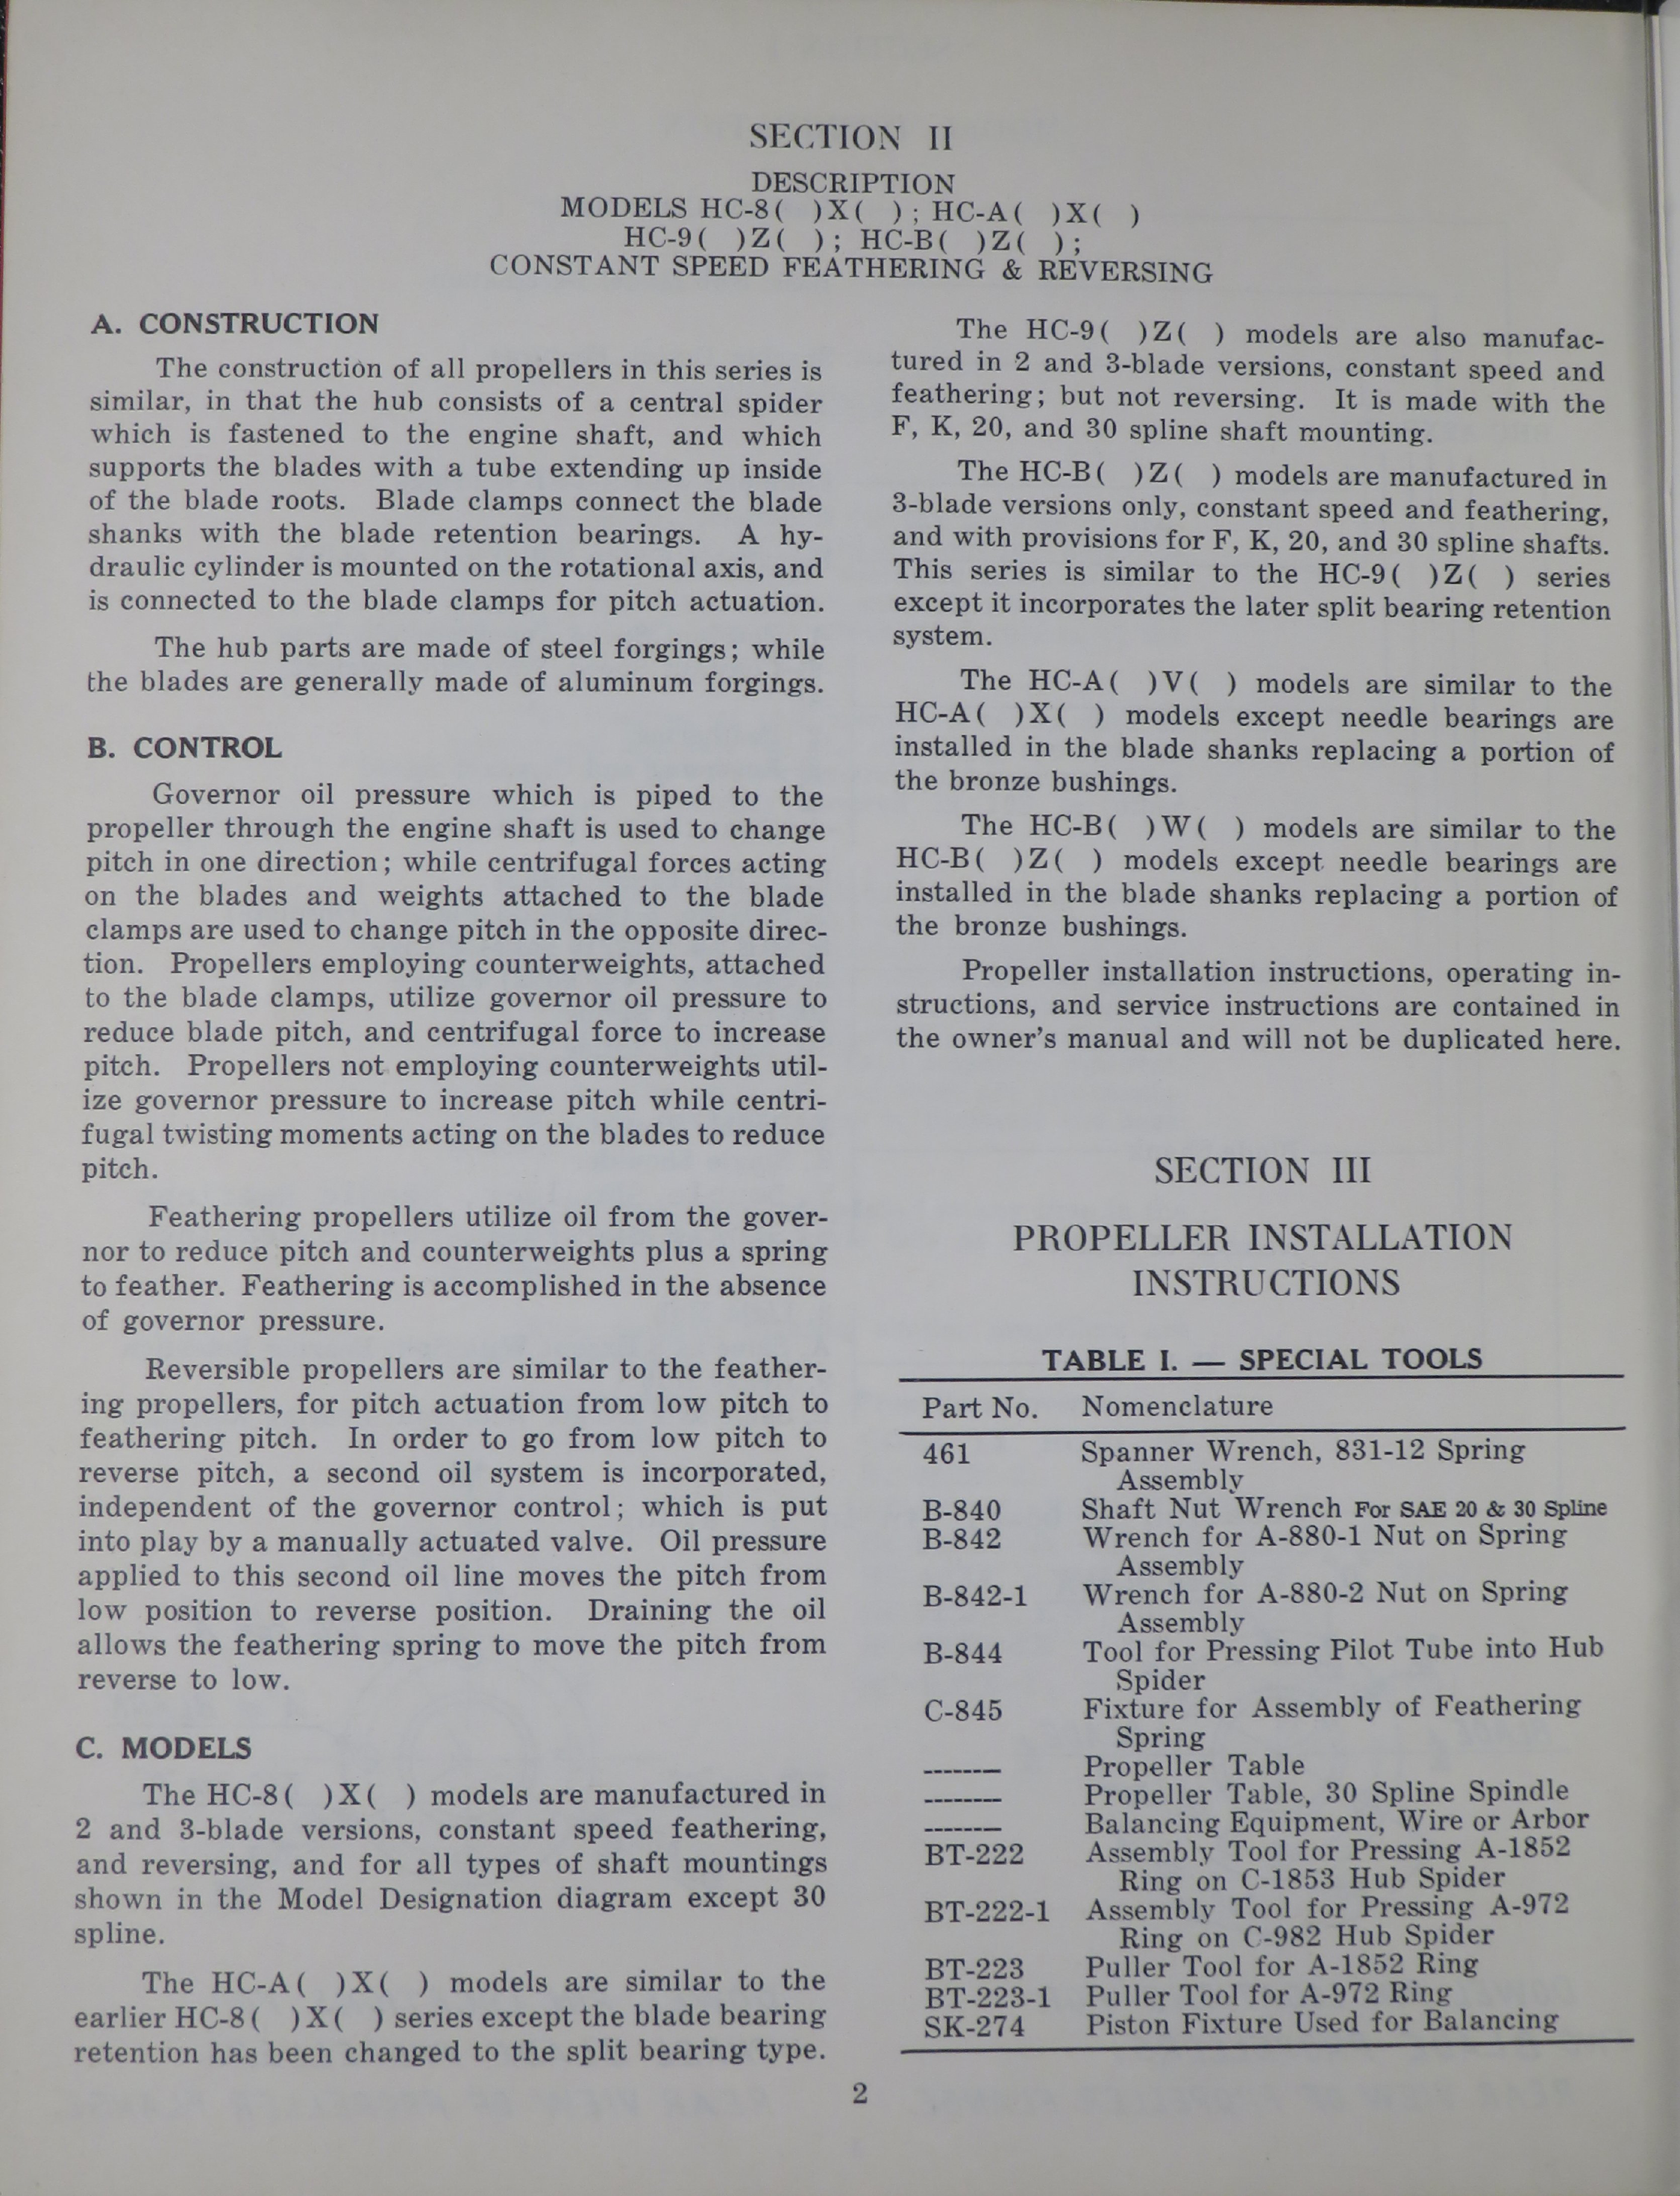 Sample page 6 from AirCorps Library document: Overhaul Instructions for Constant Speed, Feathering and Reversing Hartzell Propellers